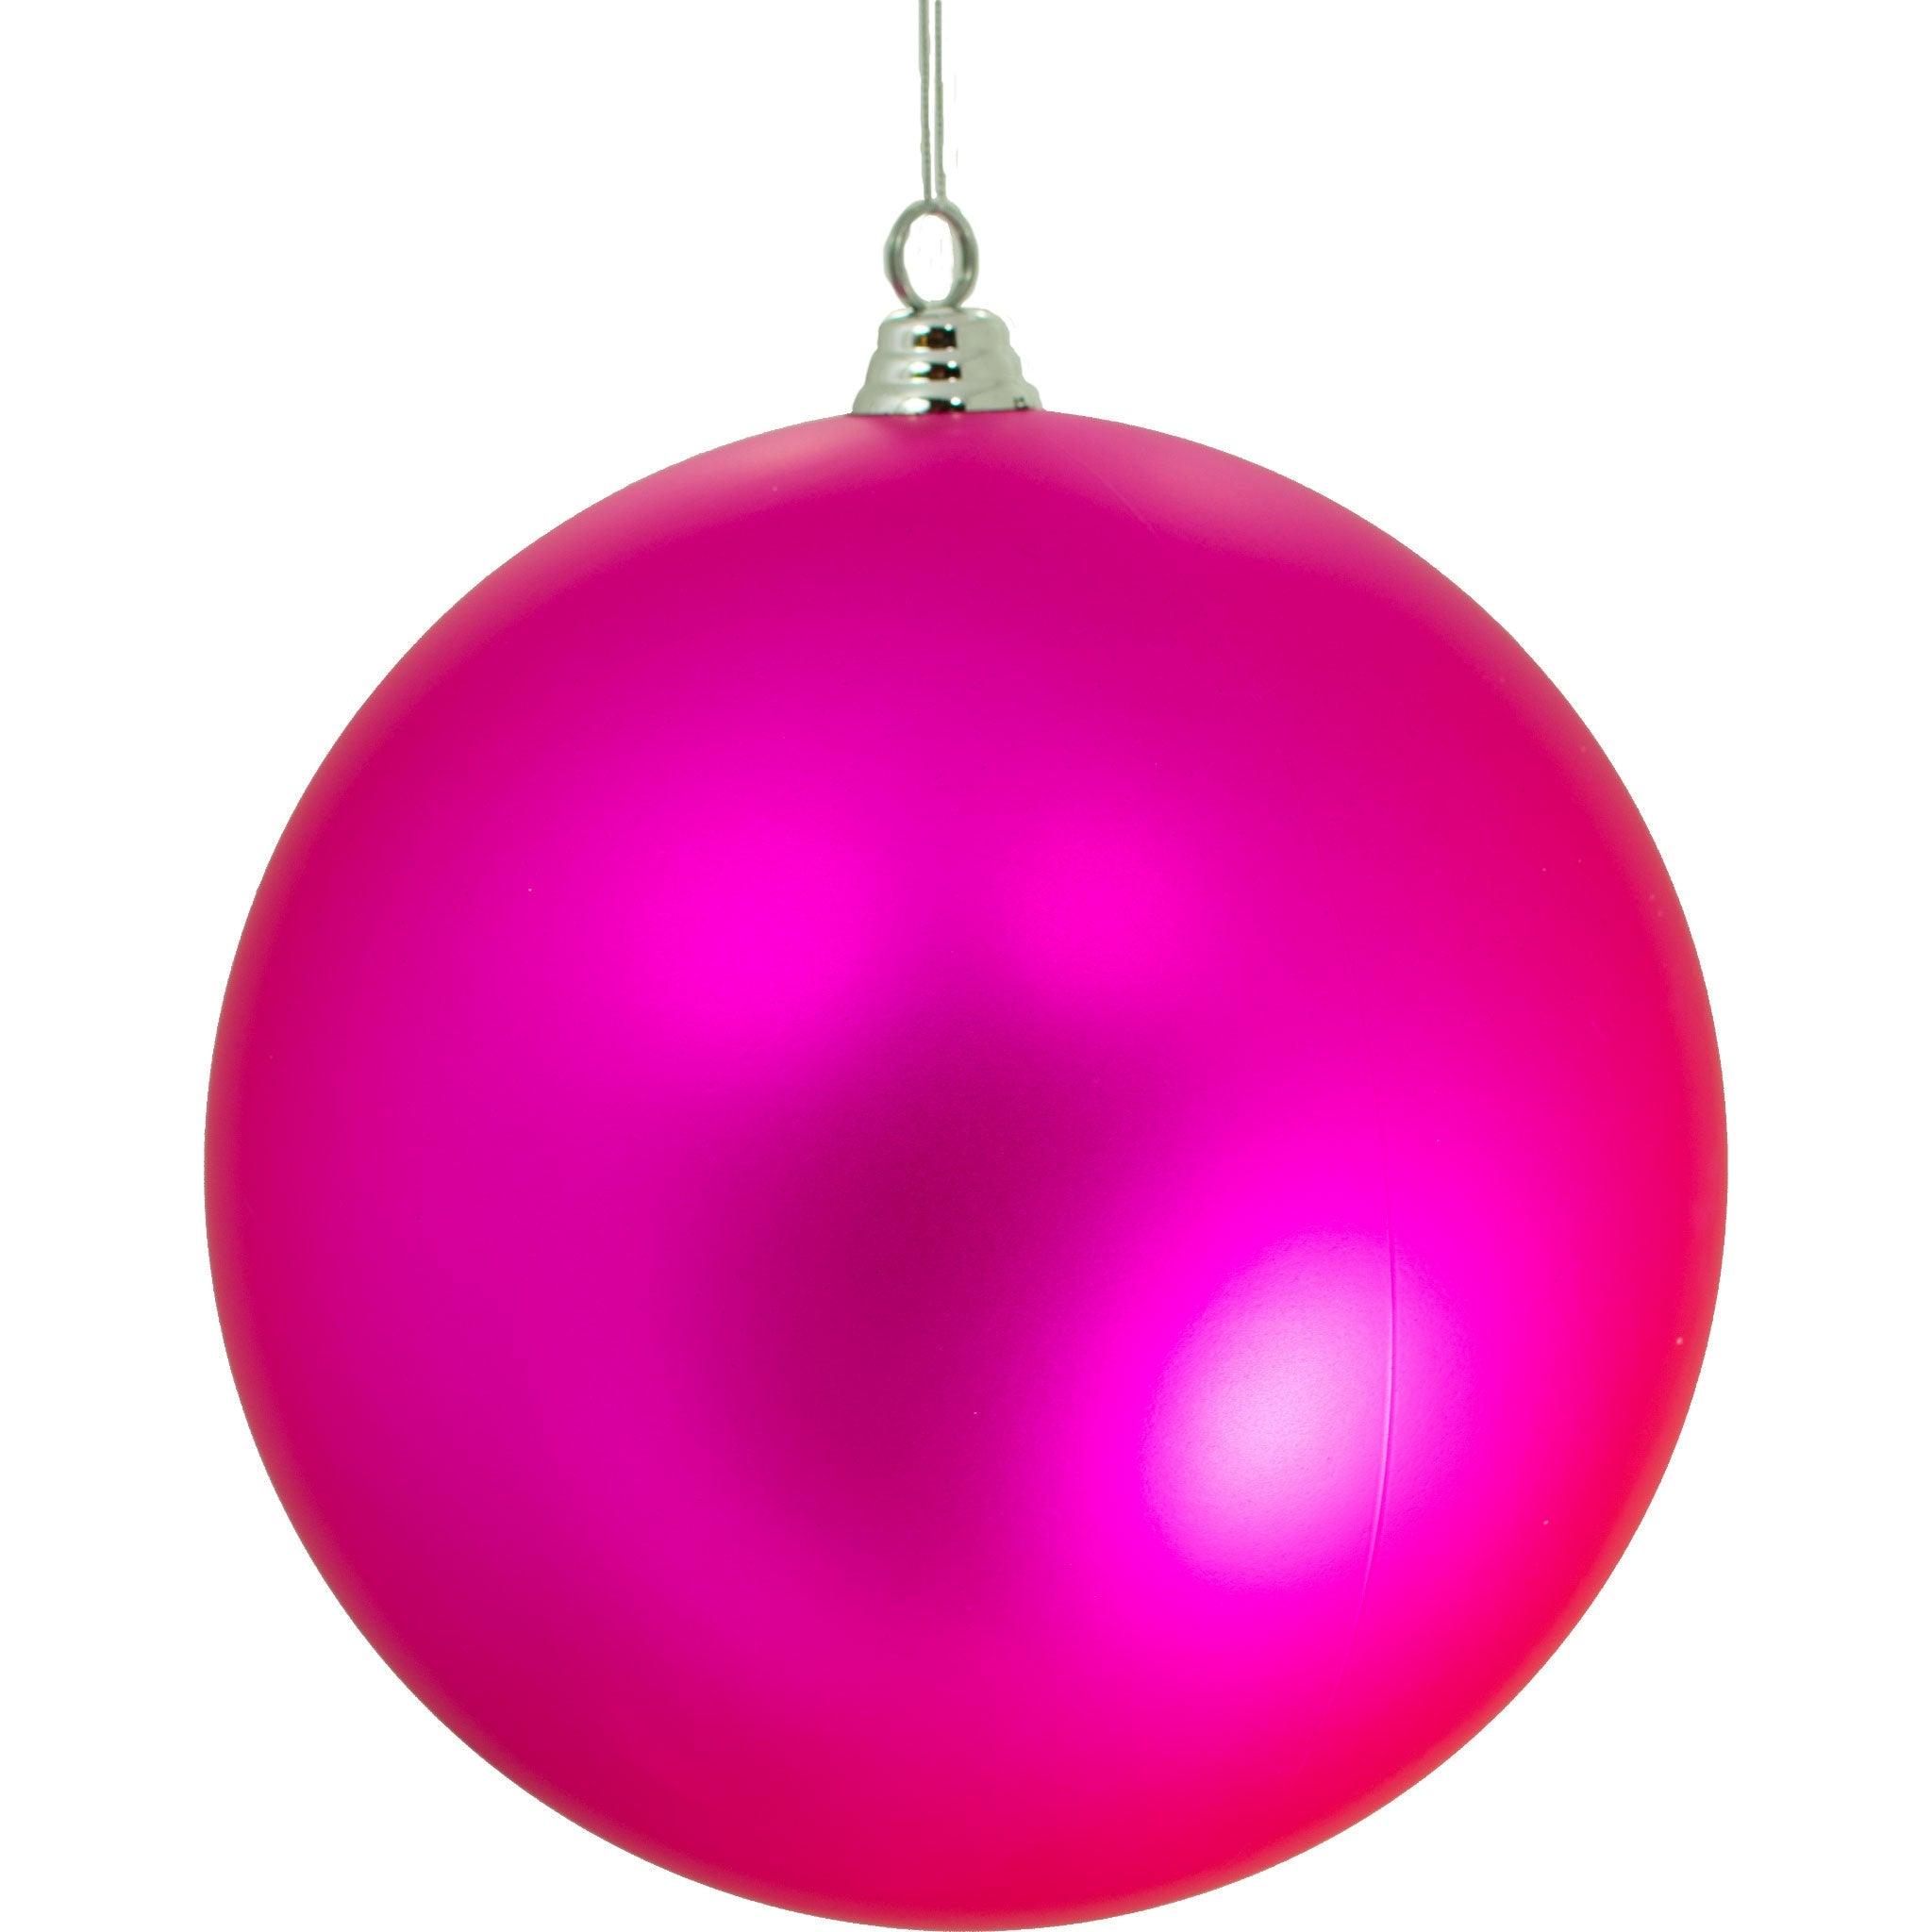 Matte Pink Plastic Ball Ornaments from Lee Display for Sale Now 200mm